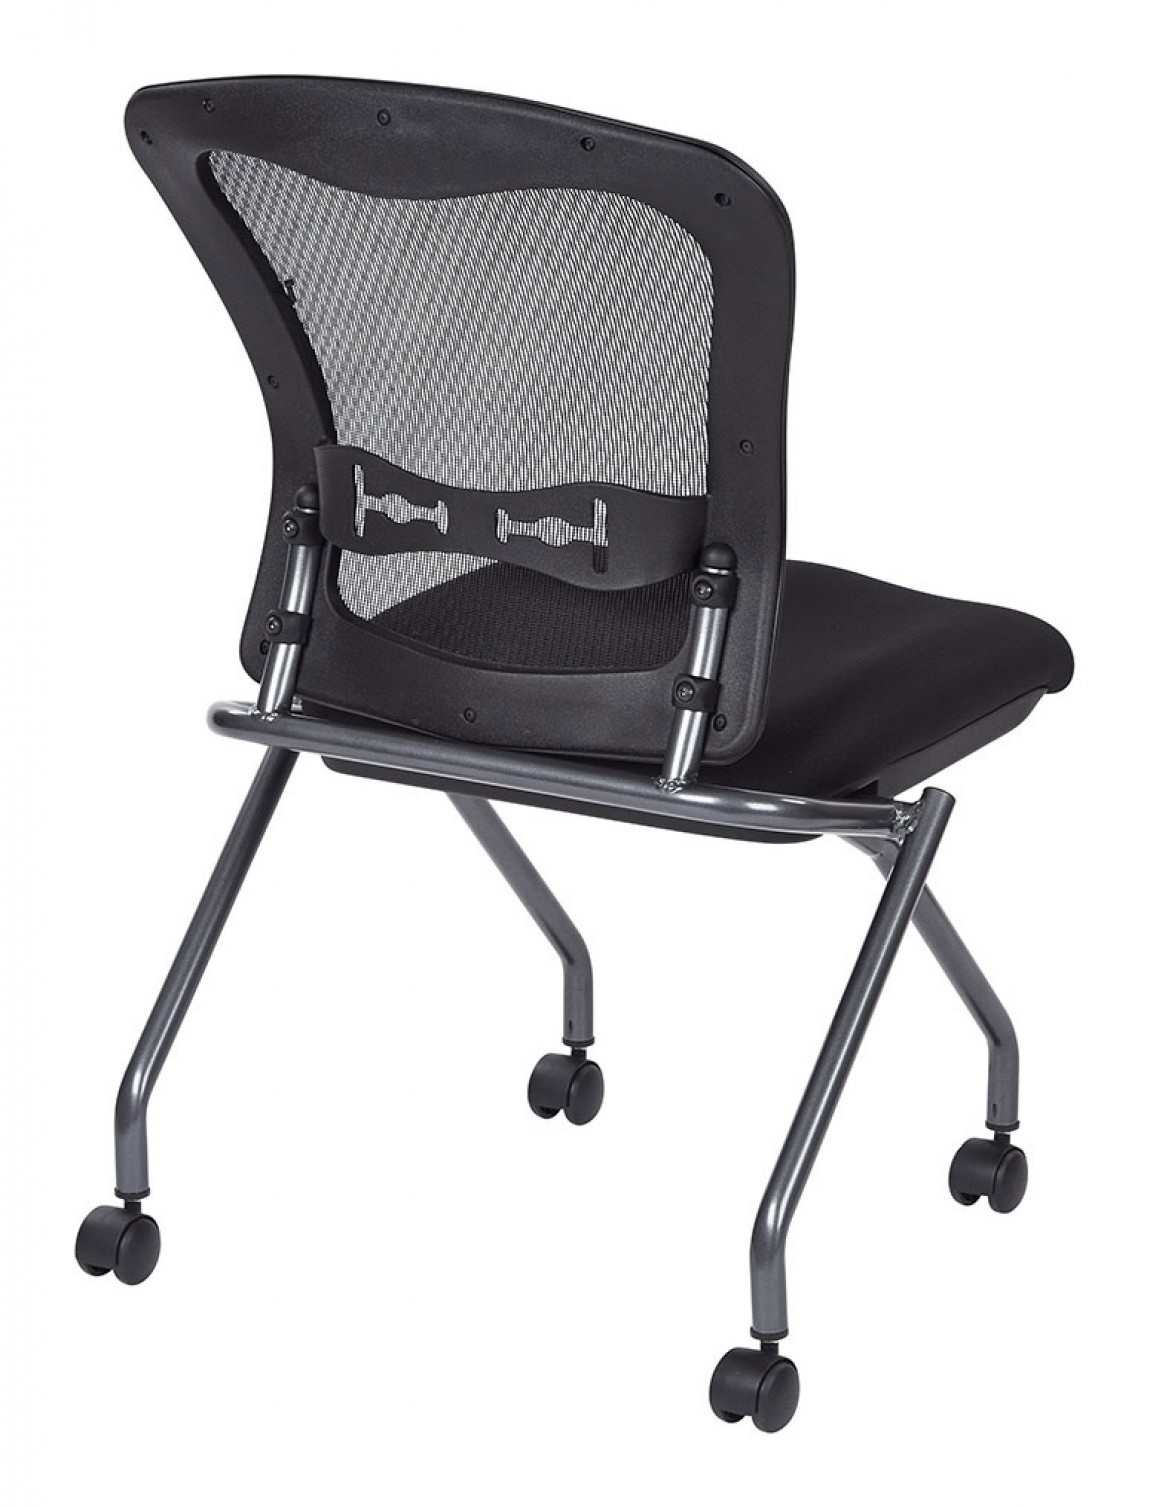 Nesting Chair without Arms - 2 Pack